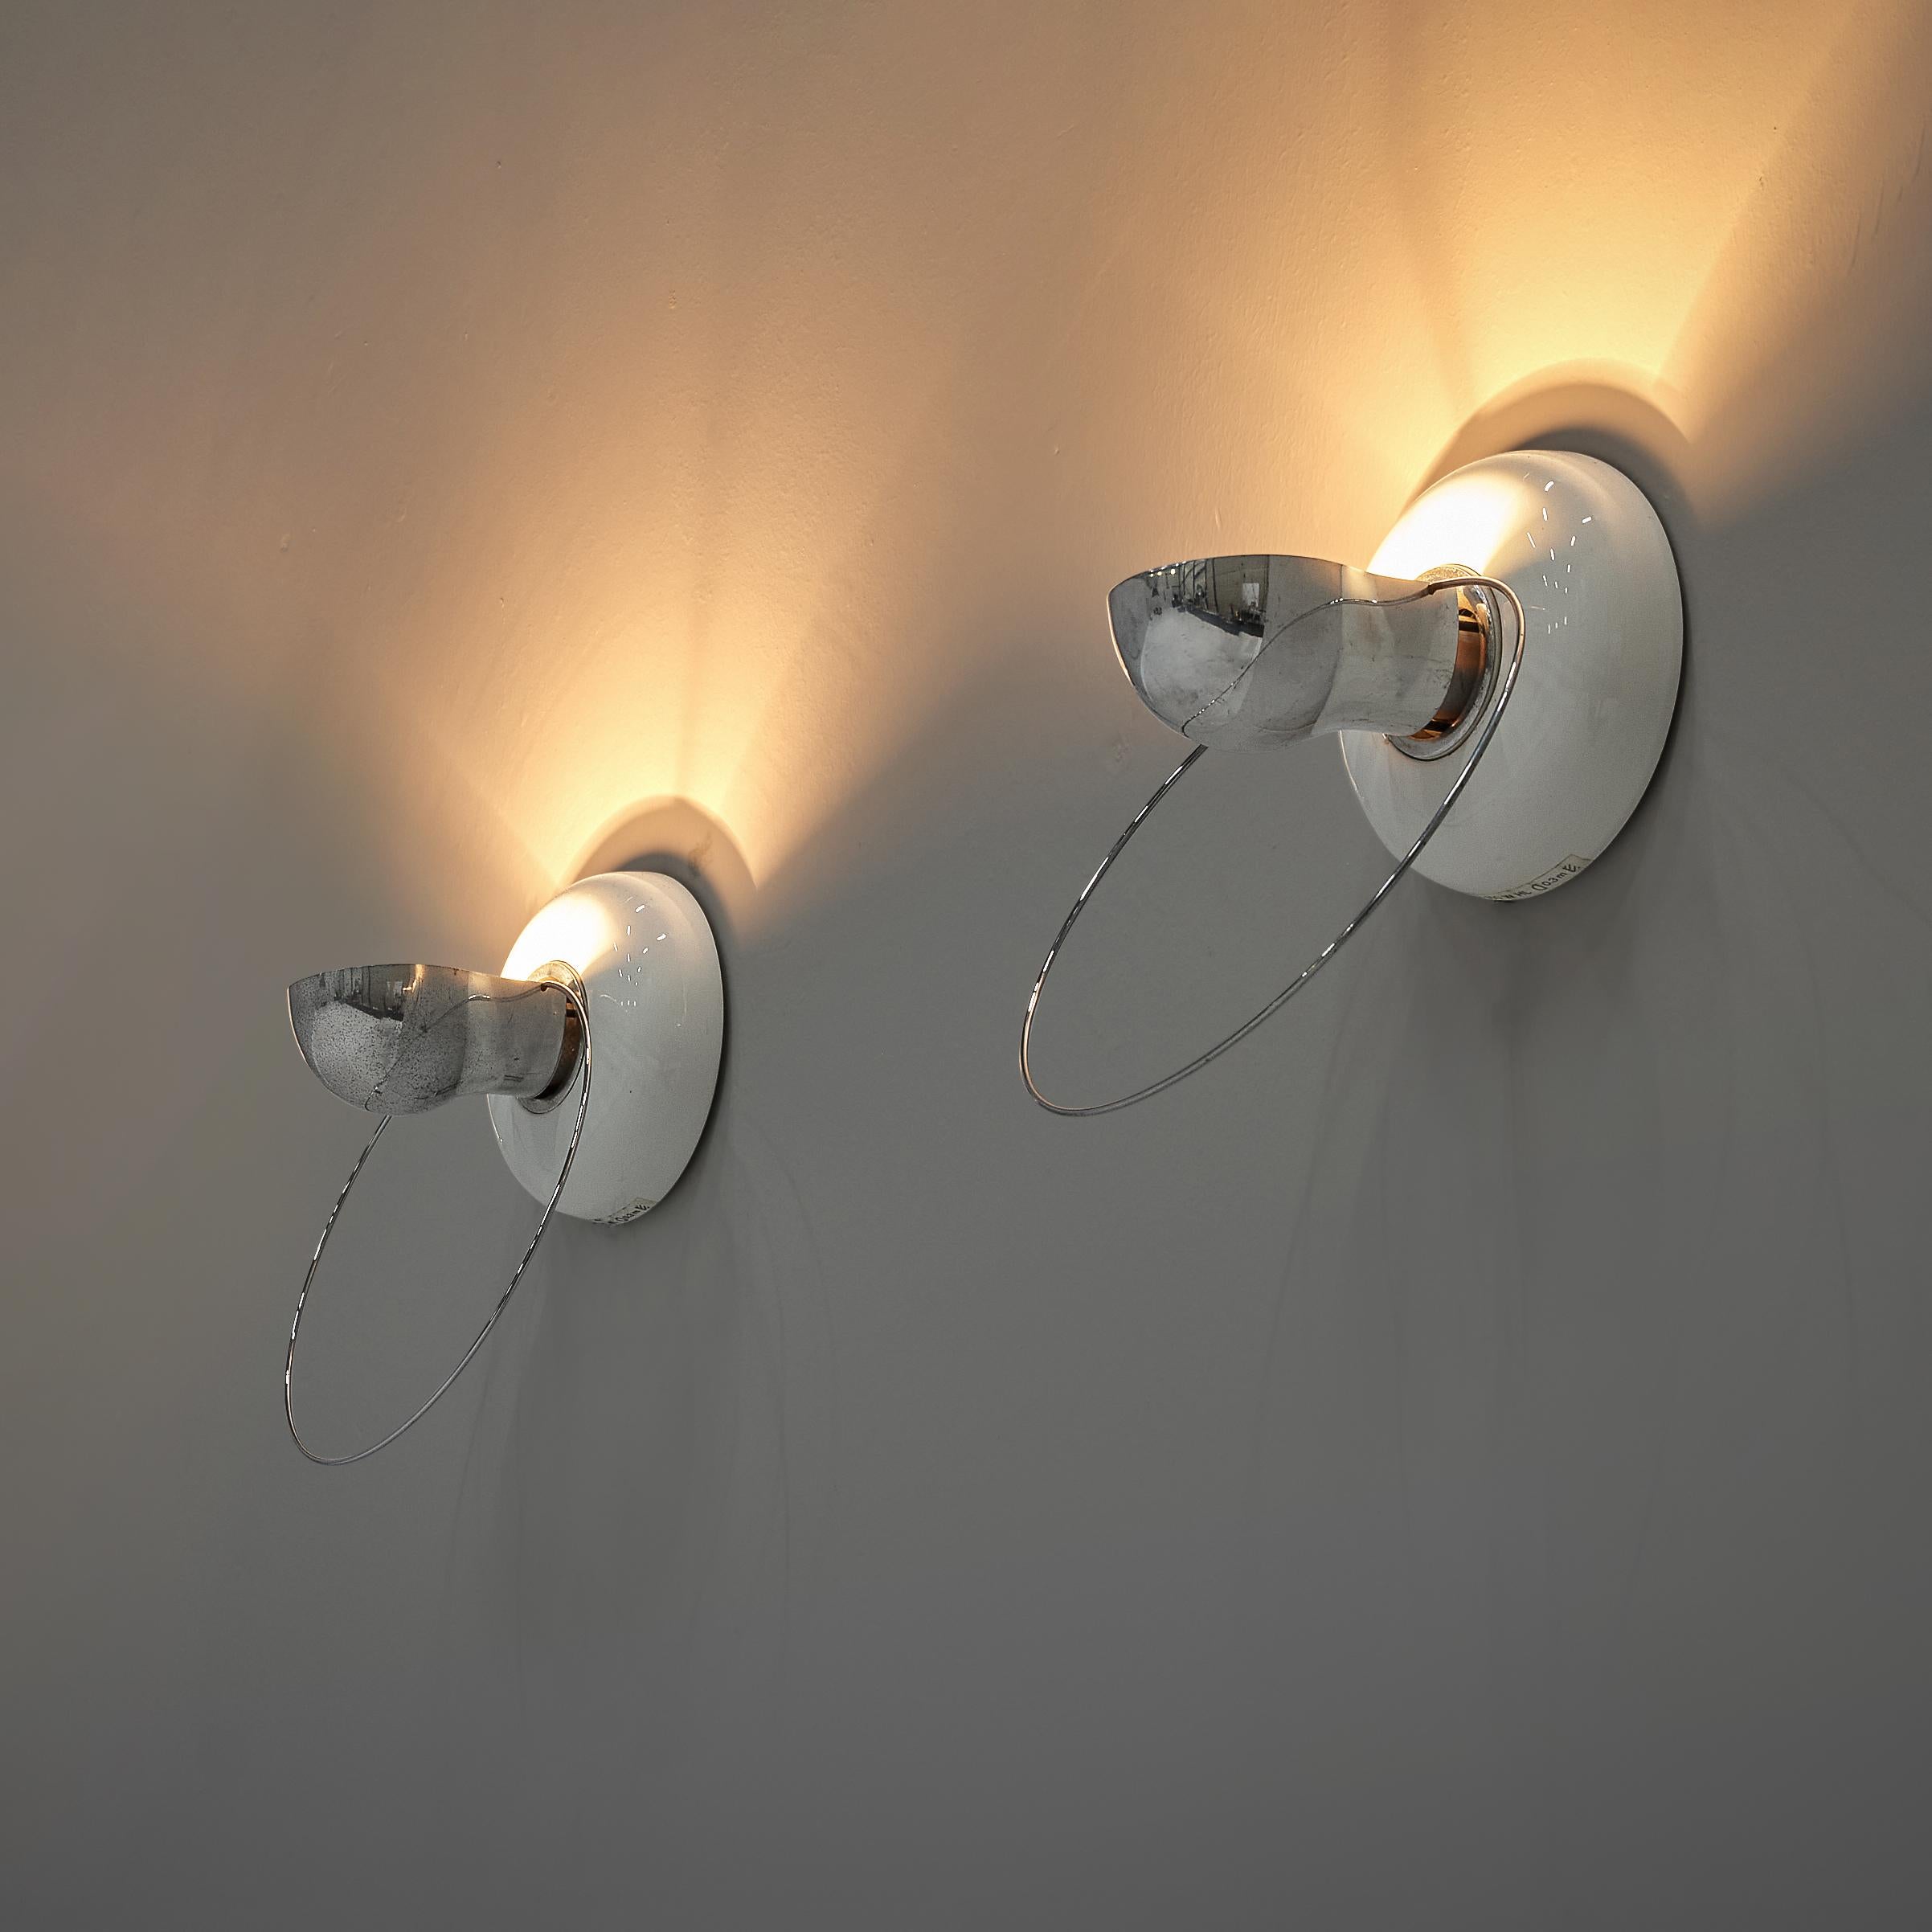 Achille Castiglioni for Flos, wall lamps model ‘Bi Bip’, ceramic, steel, Italy, 1977

Delicate wall lights designed by Achille Castiglioni in 1977. The forms but also the materials make this lamp special in its expression. From a round base in